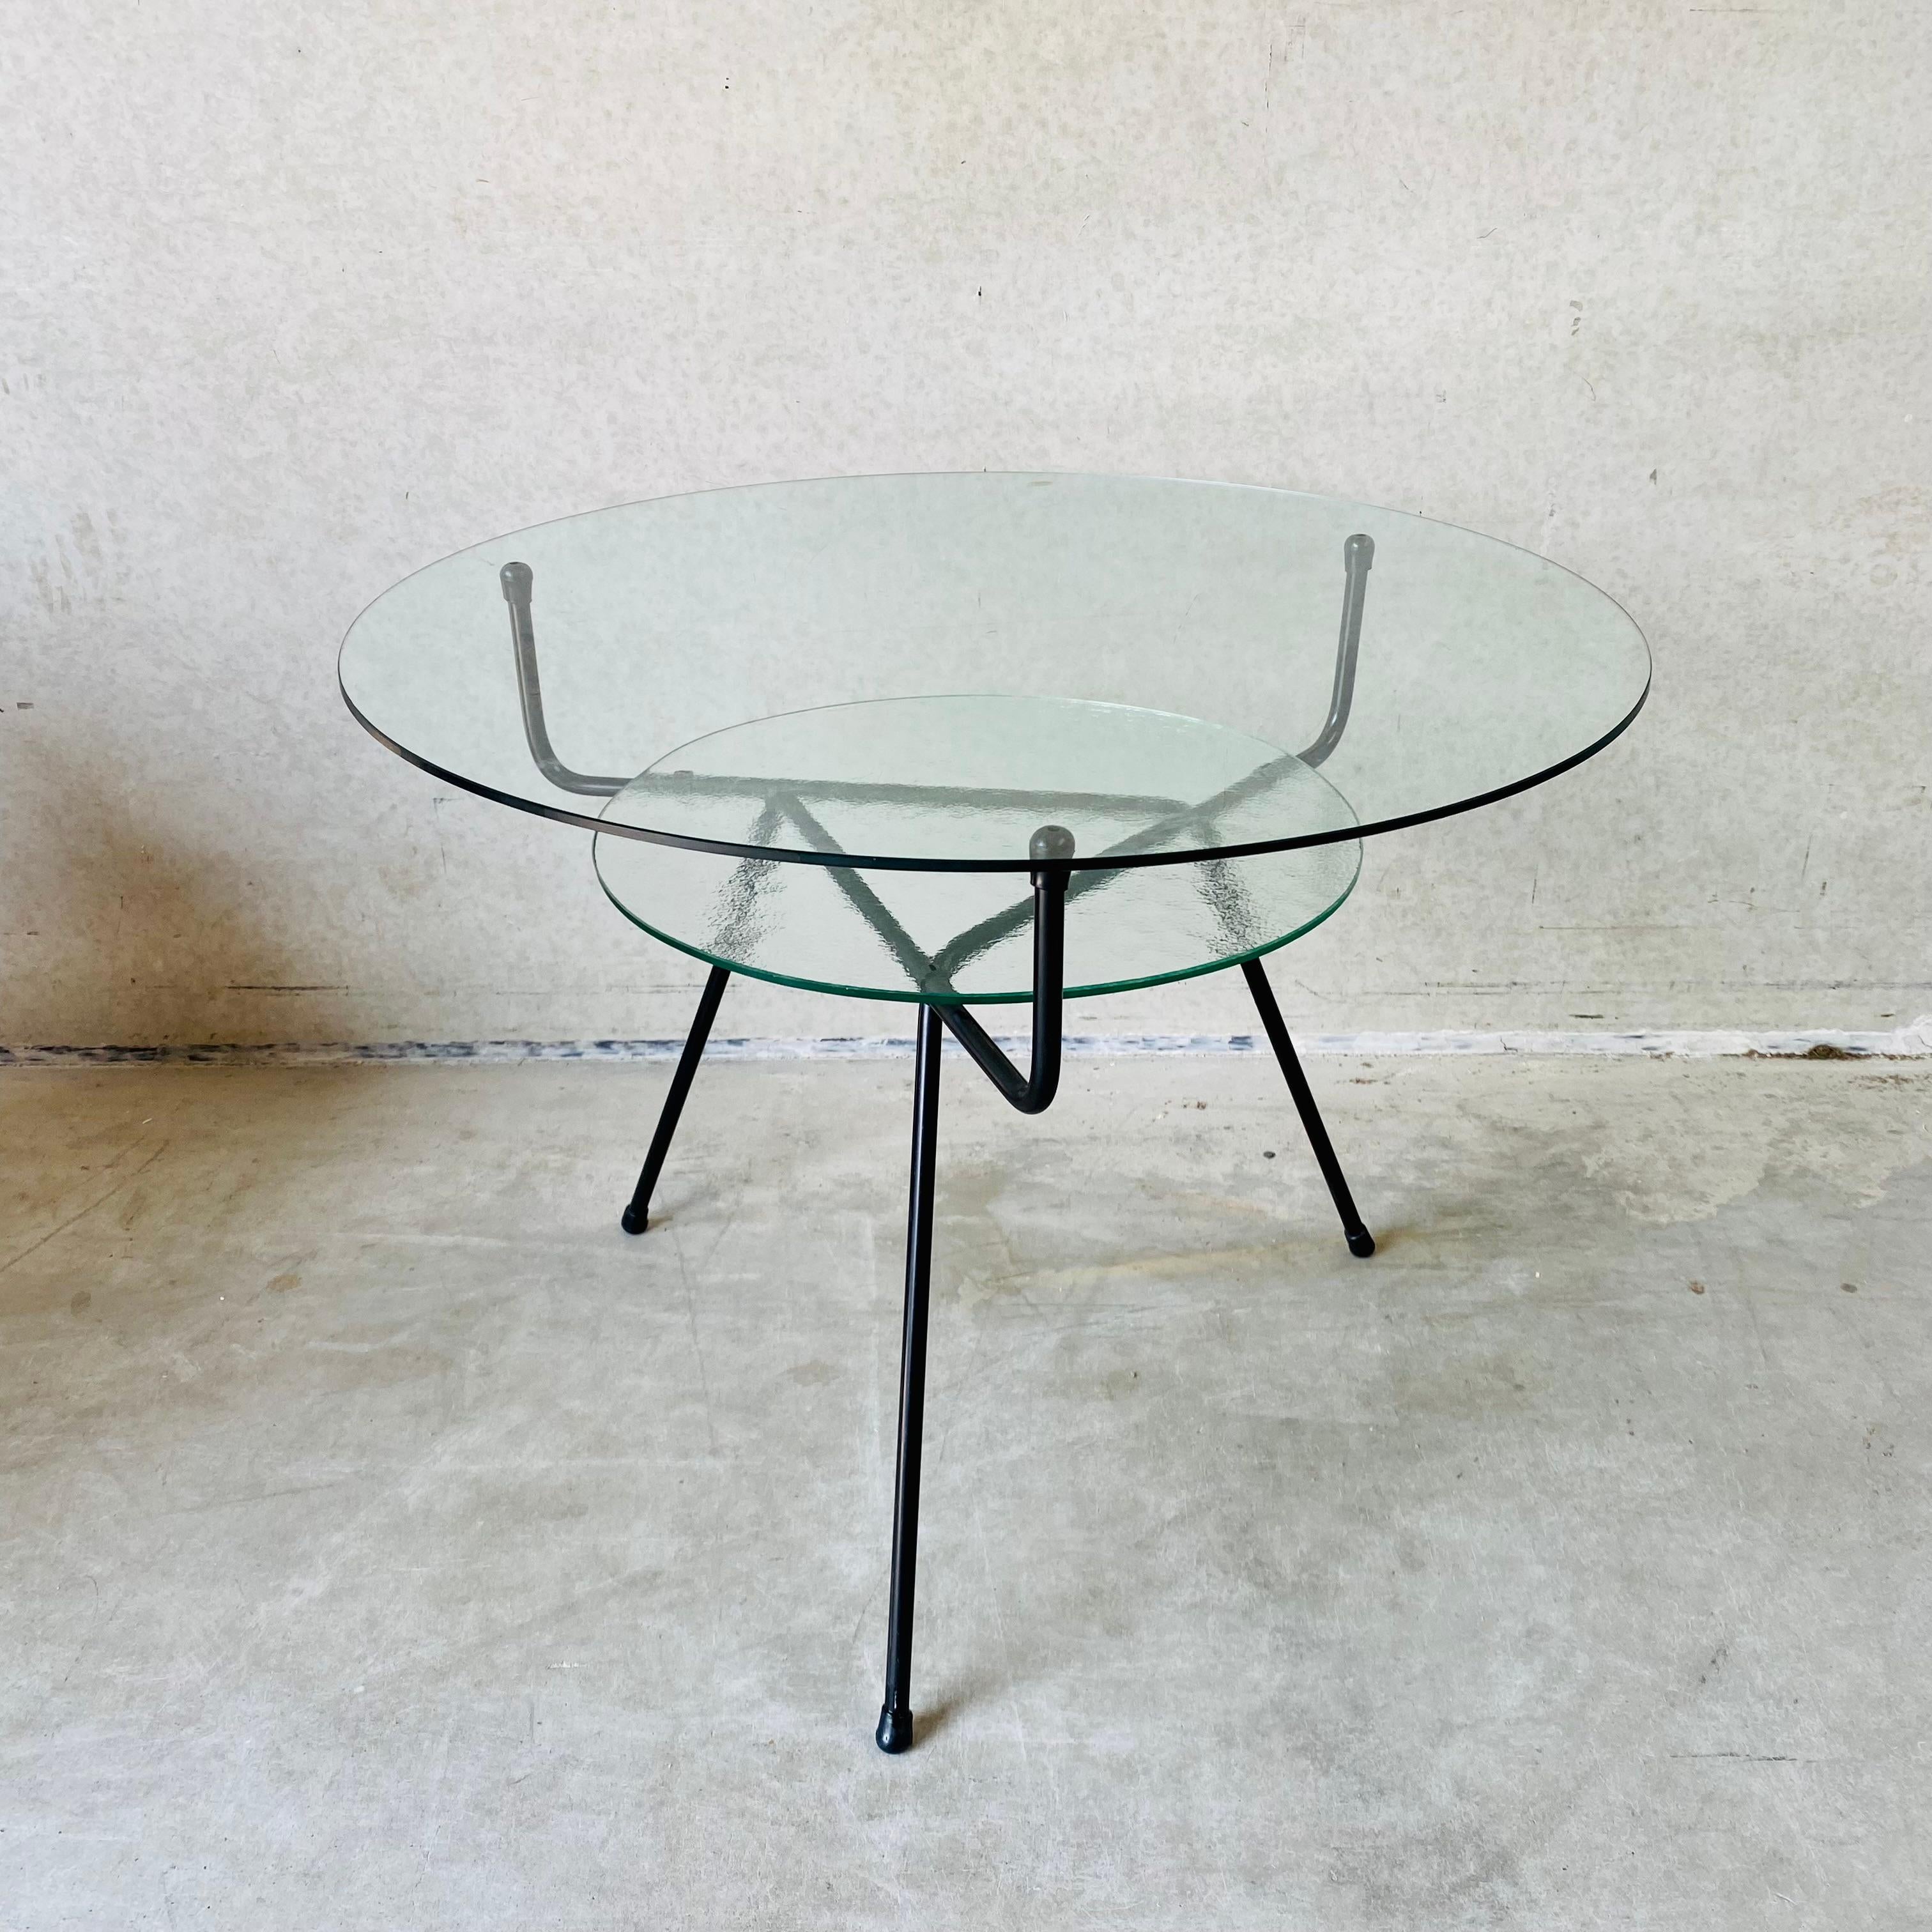 KEMBO Designer W.H. Gispen Model 509: The Timeless Elegance of Mid-Century Vintage Glass Coffee Tables

Introduction:
Welcome to the world of KEMBO, where timeless design and mid-century charm blend seamlessly to create iconic pieces that stand the